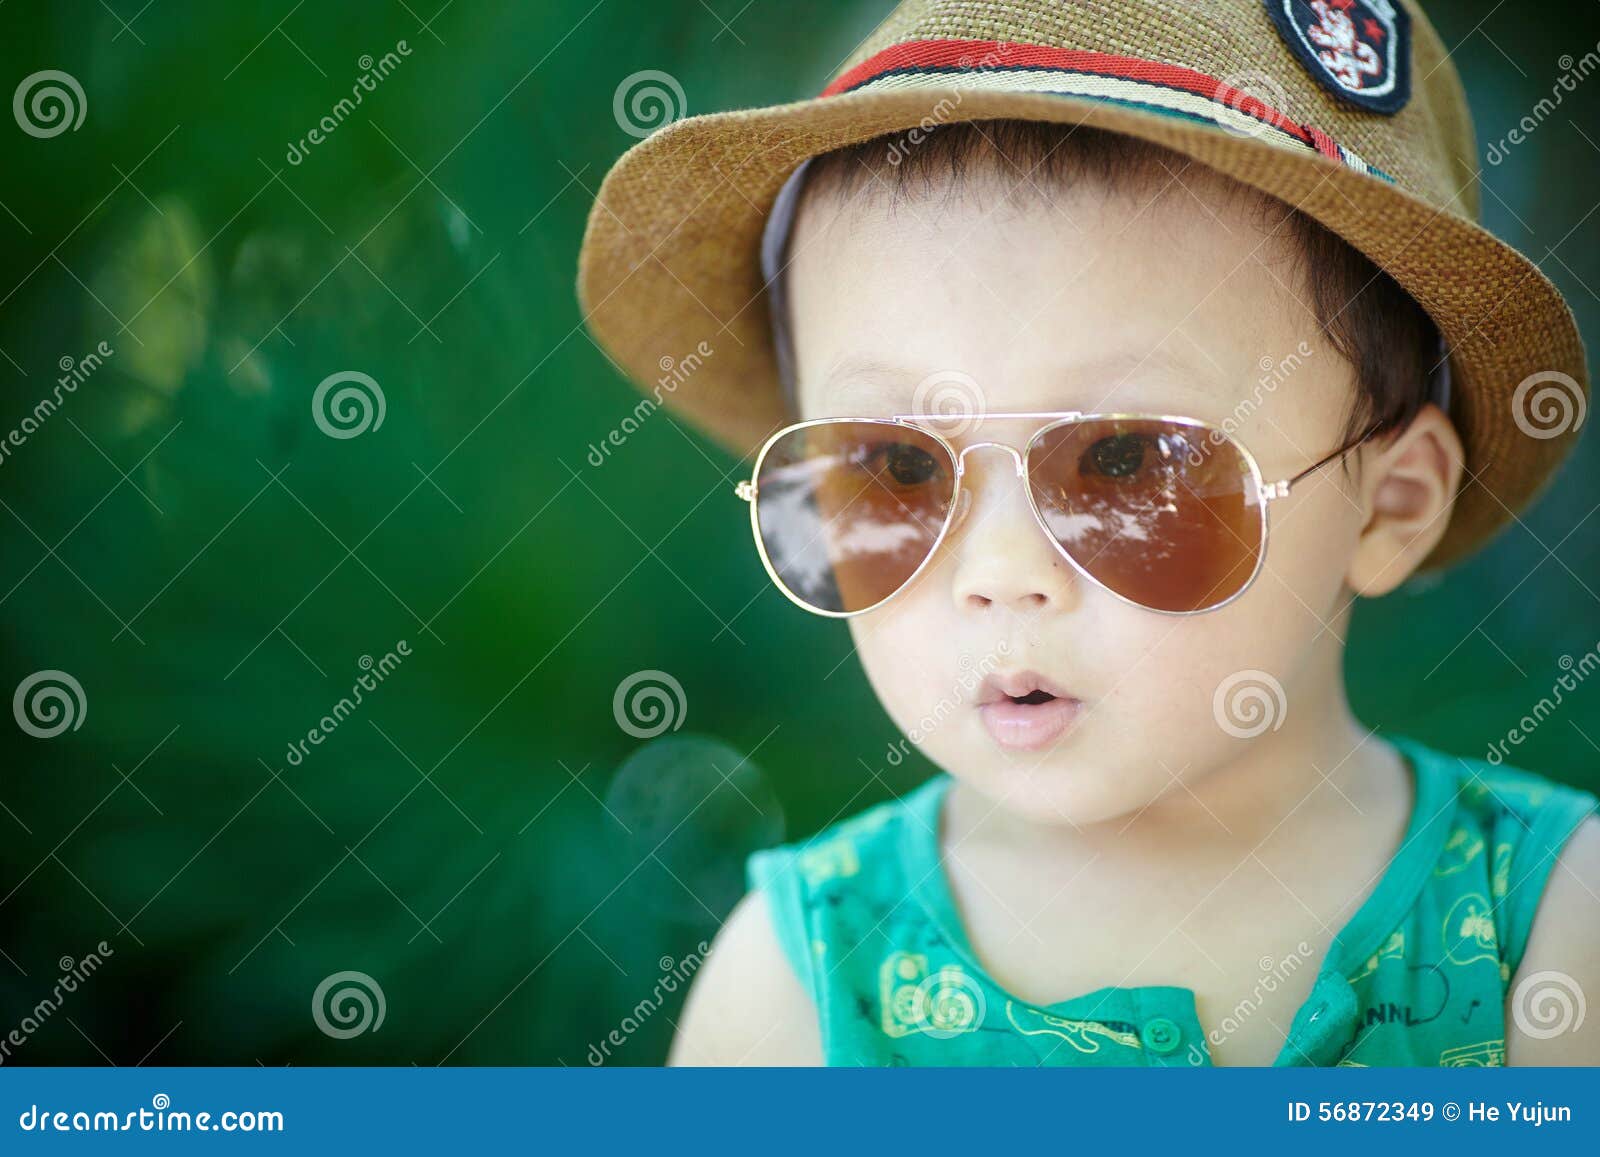 Baby In Sun Glasses Stock Image Image Of Leisure Green 56872349